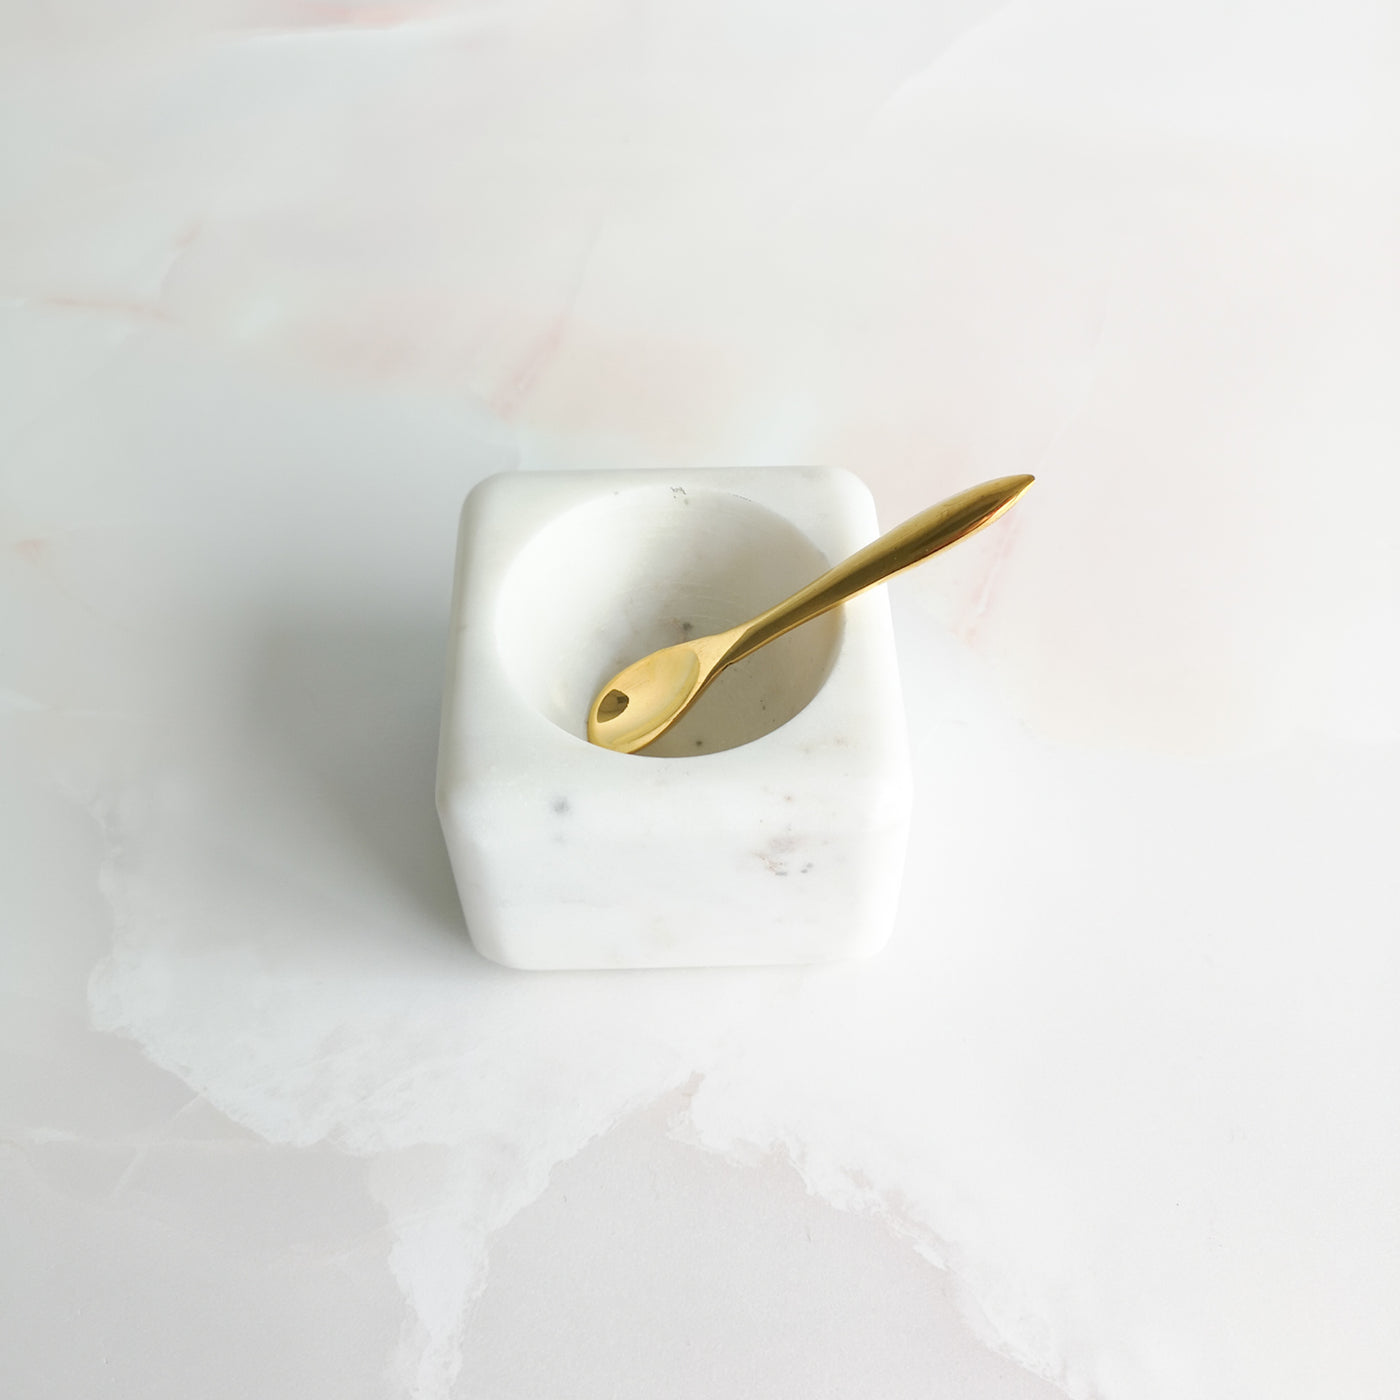 Spoon with Marble Dish